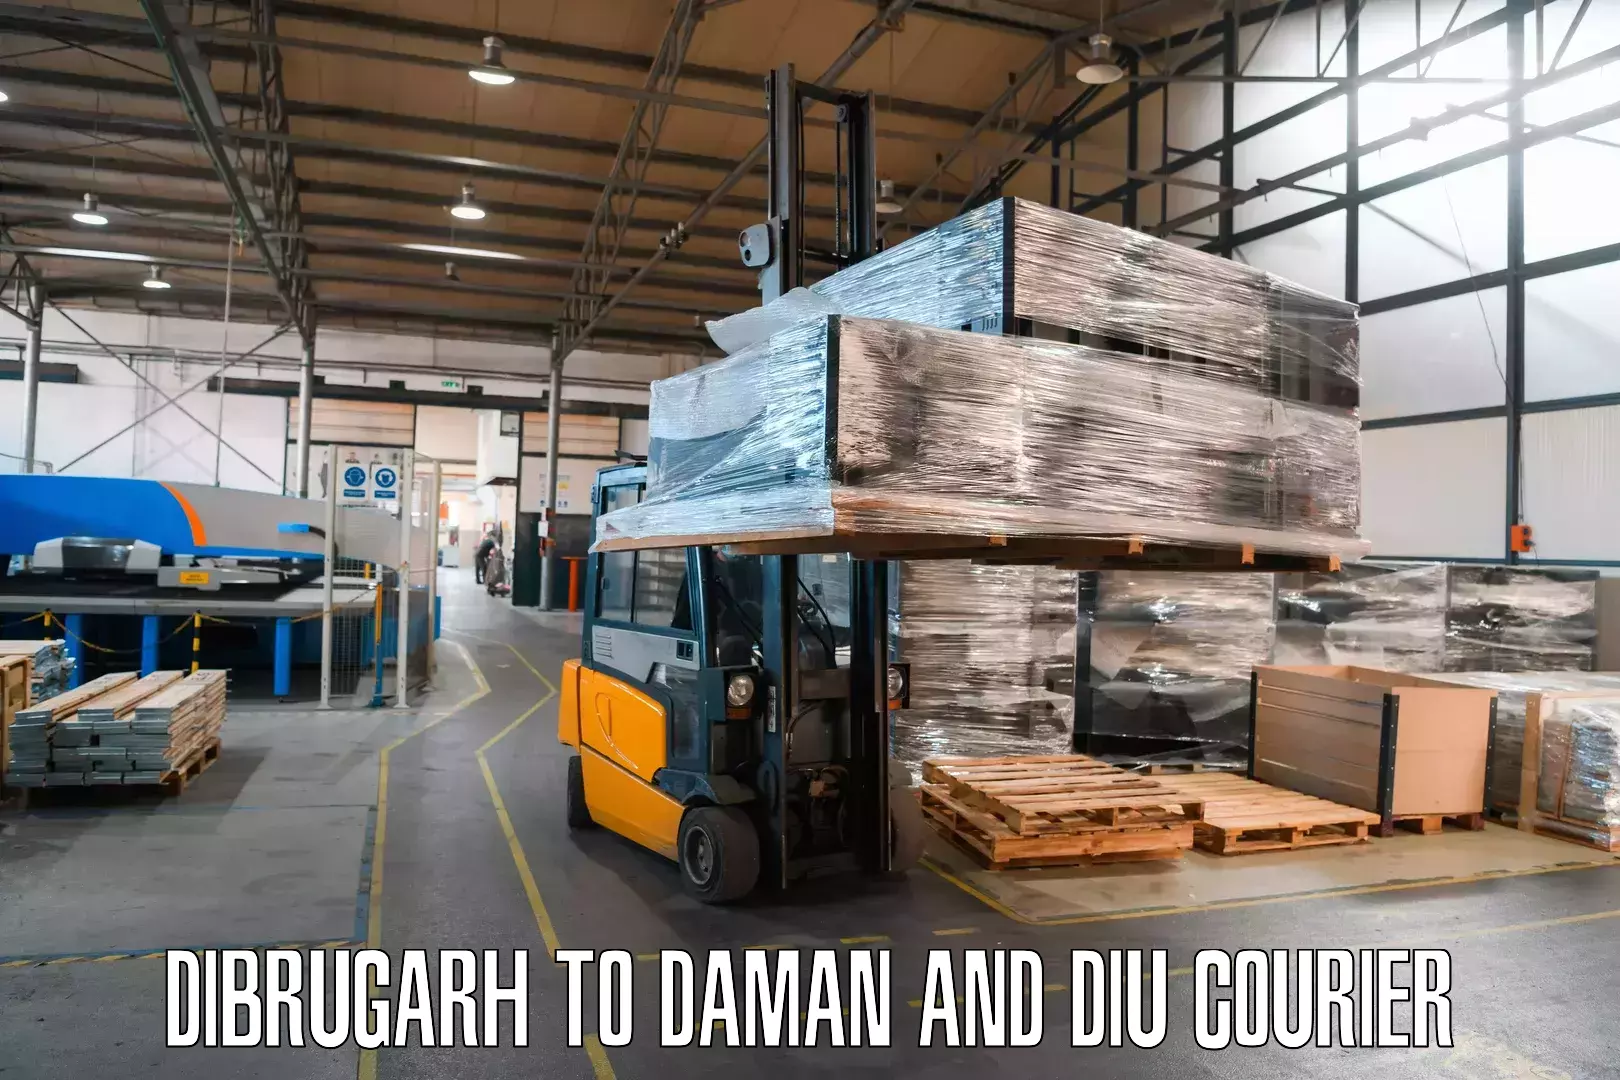 Package delivery network Dibrugarh to Daman and Diu